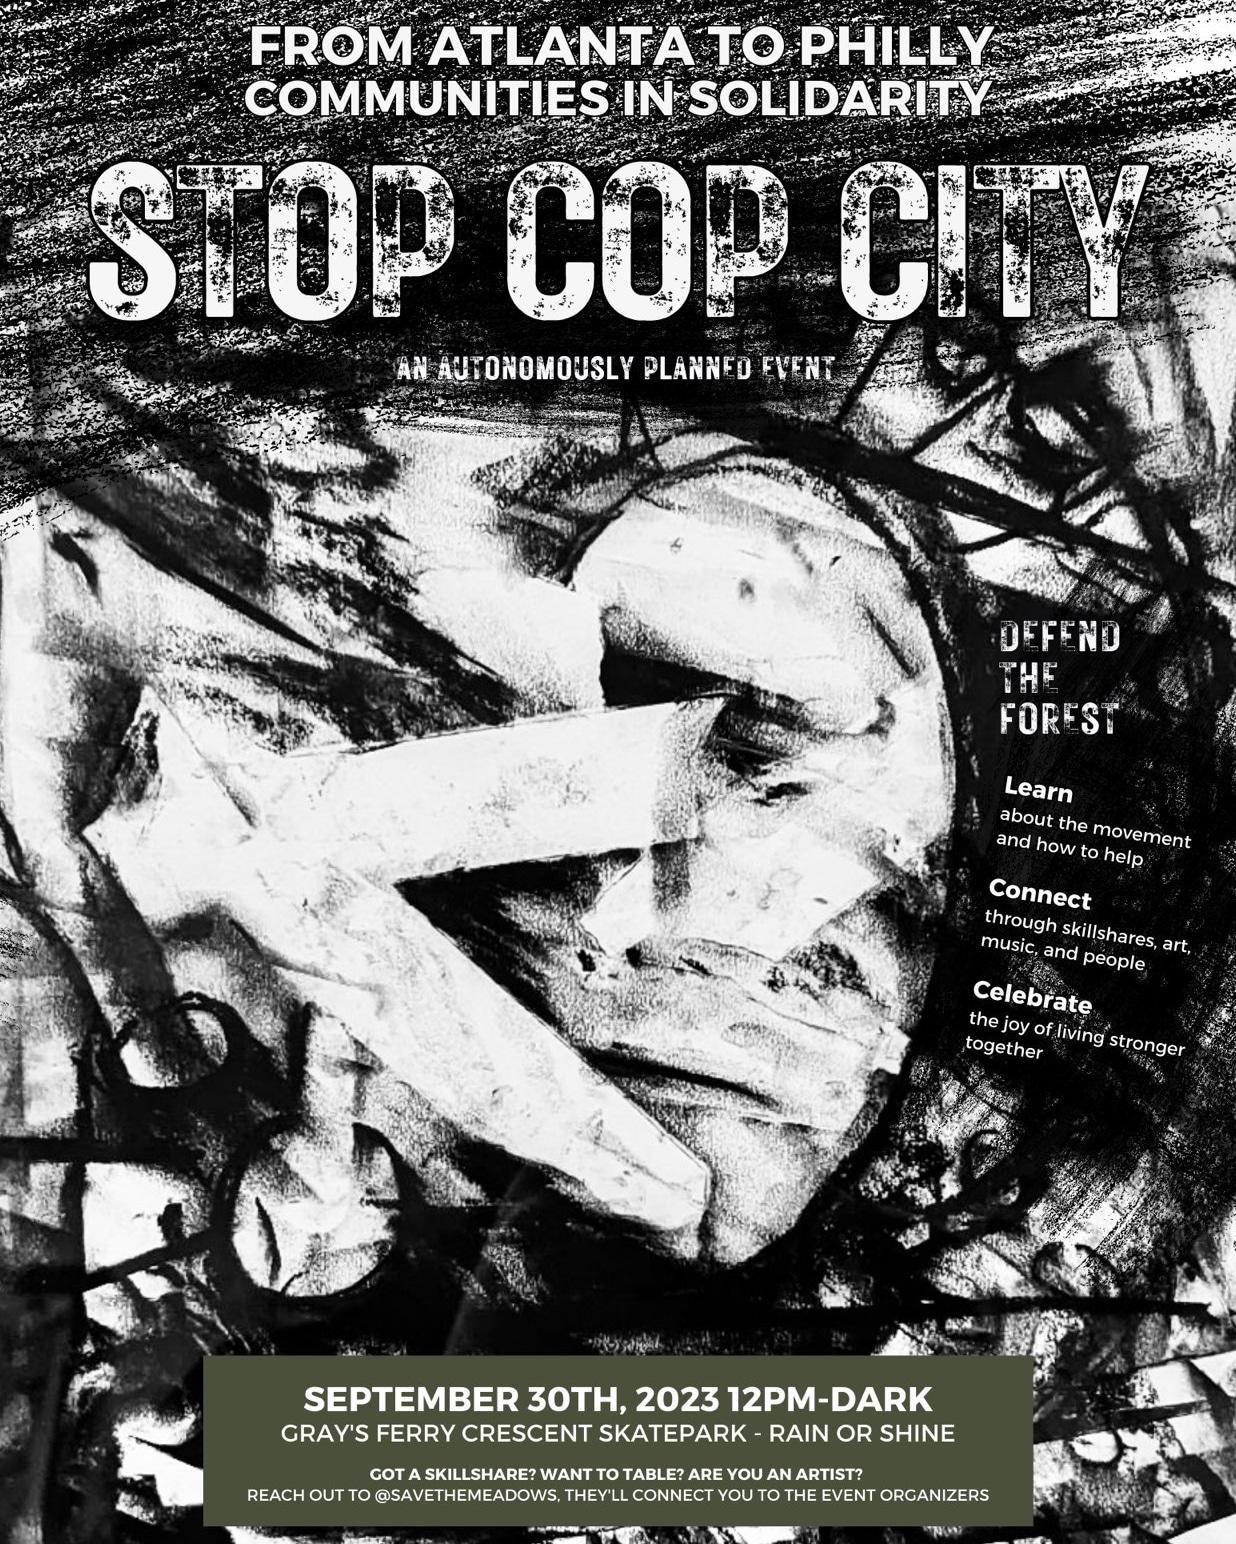 Flyer with a smudgy charcoal design and the following text: From Atlanta to Philly Communities in Solidarity / STOP COP CITY: an autonomously planned event / DEFEND THE FOREST / Learn about the movement and how to help / Connect through skillshares, music, and people / Celebrate the joy of living strong together / September 30th, 2023 12PM-dark Gray's Ferry Crescent Skatepark - Rain or Shine / Got a skillshare? Want to table? Are you an artist? Reach out to @savethemeadows. They'll connect you to the event organizers.